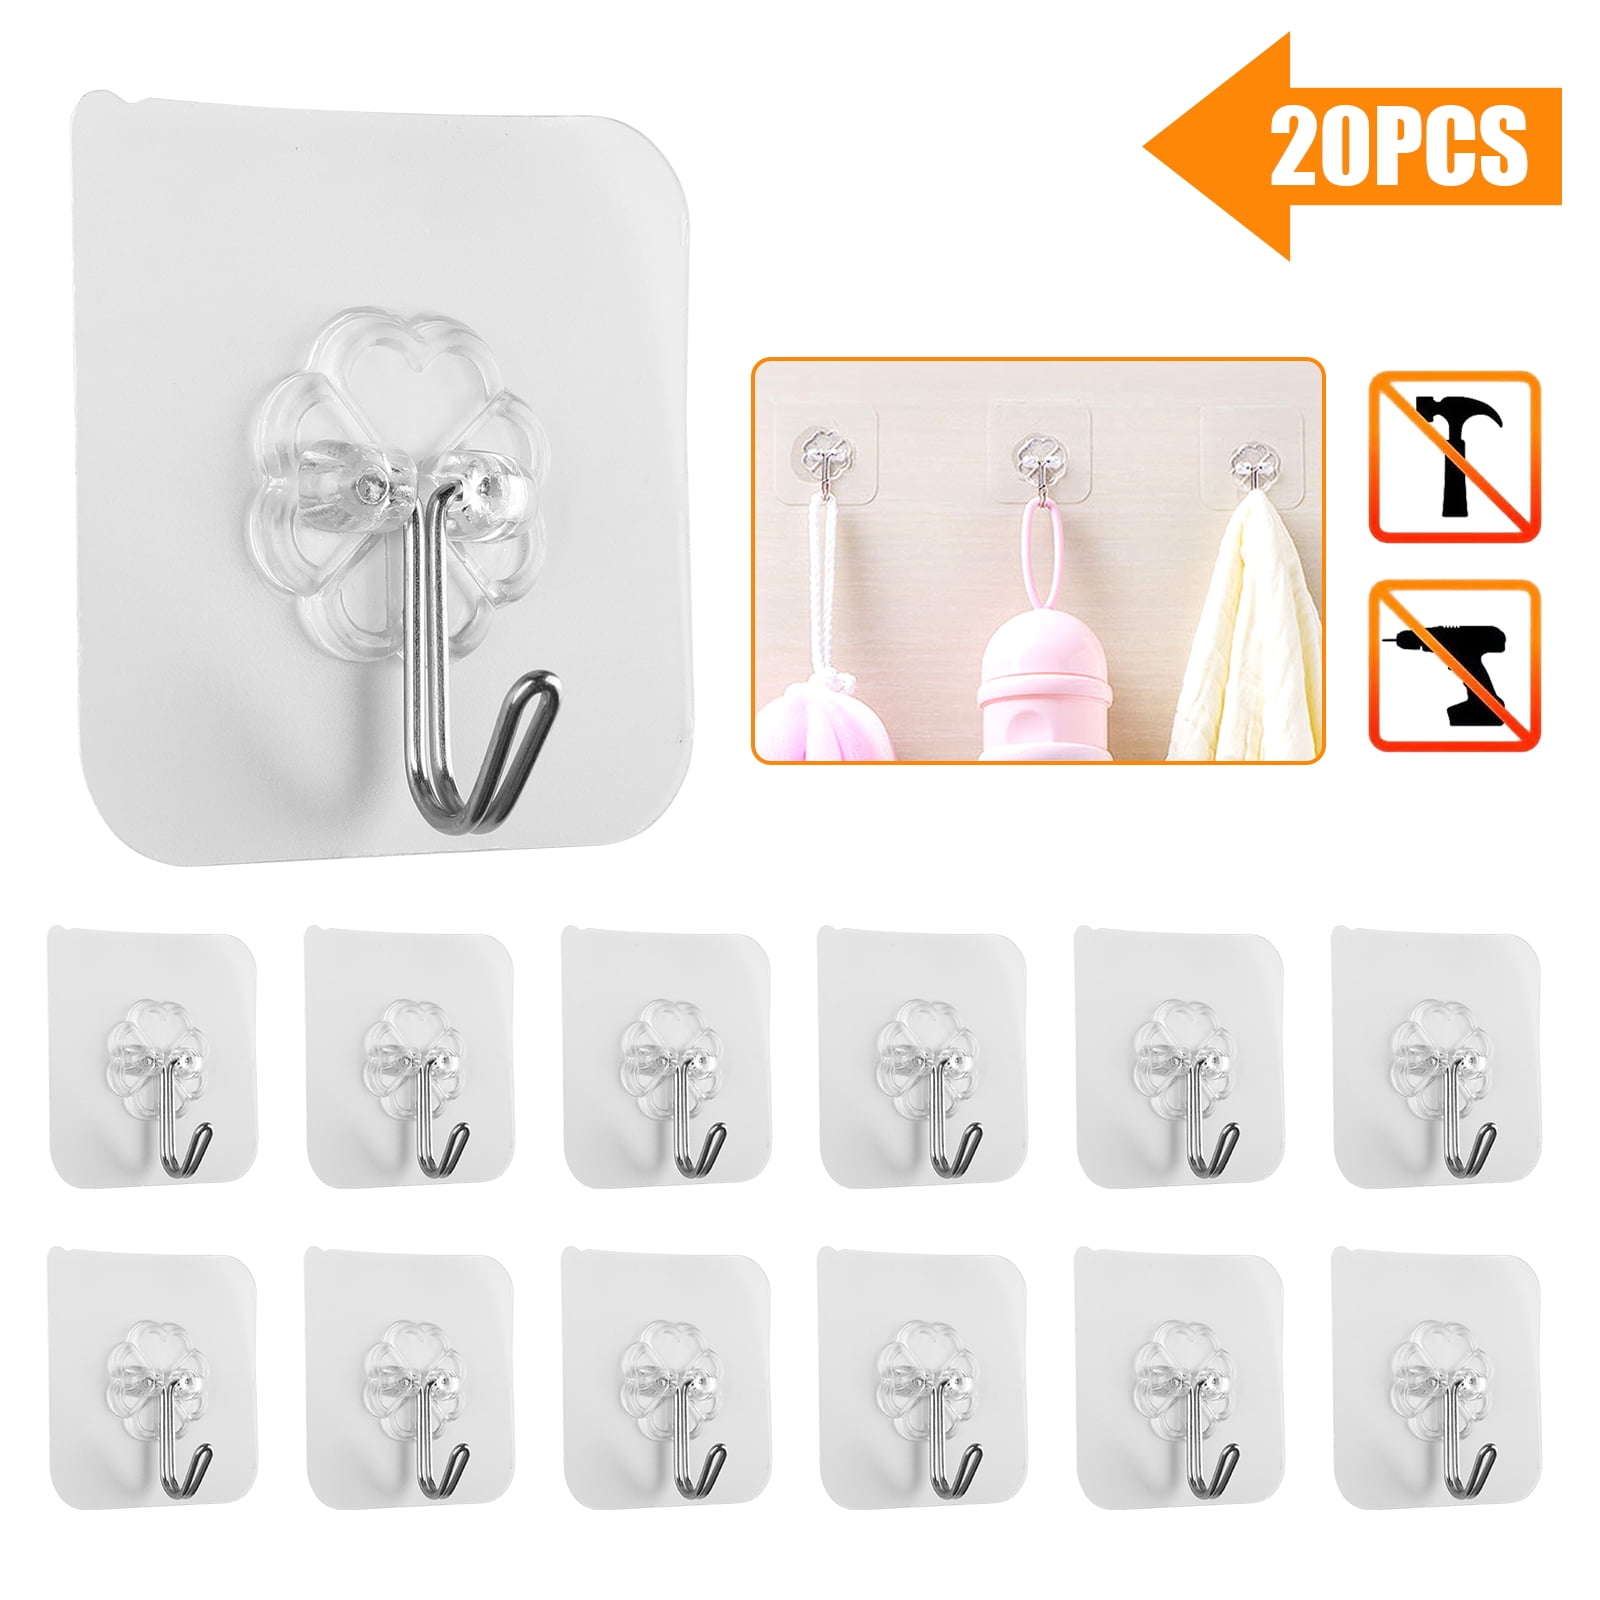 20 PCS Heavy Duty Self Adhesive Hooks with Stainless Hooks Reusable for Kitchens Bathroom Adhesive Hooks Kitchen Wall Hooks Office